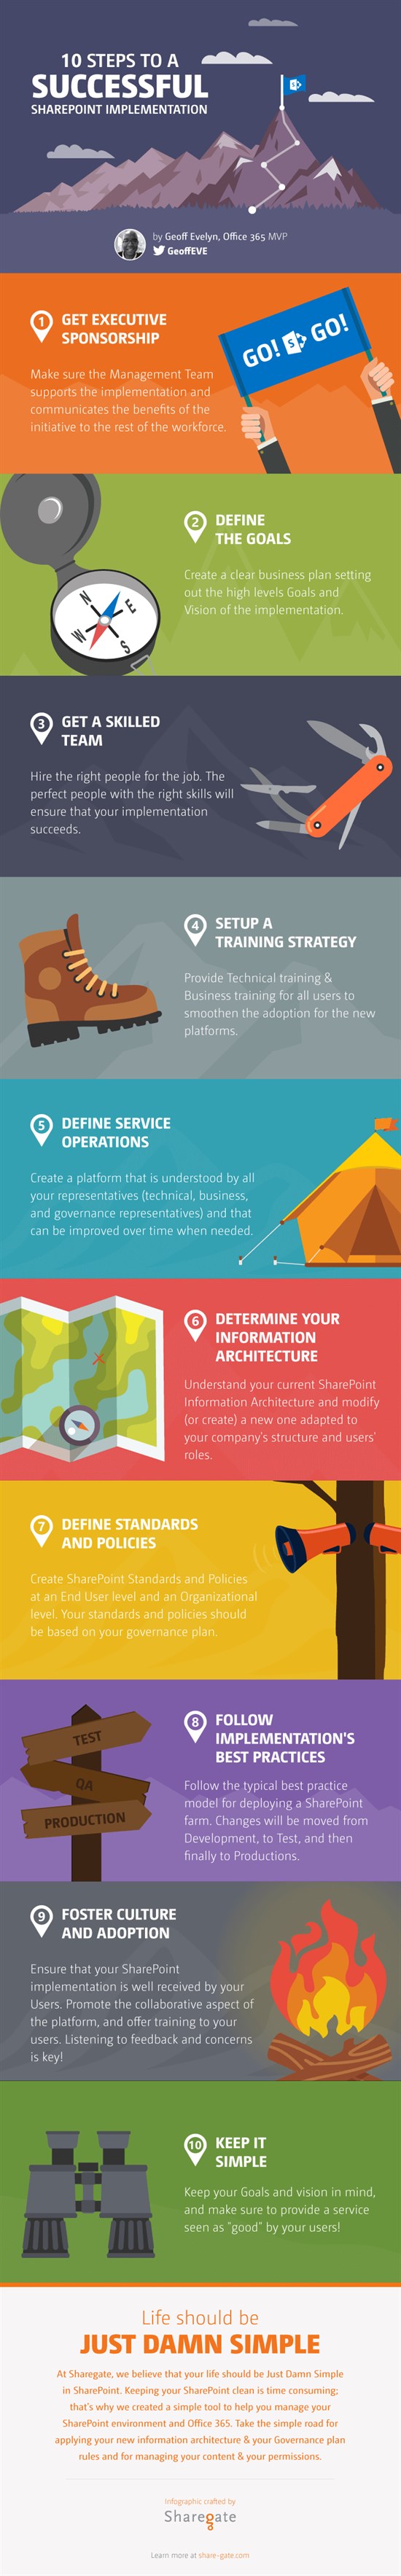 Successful SharePoint Implementation Infographic